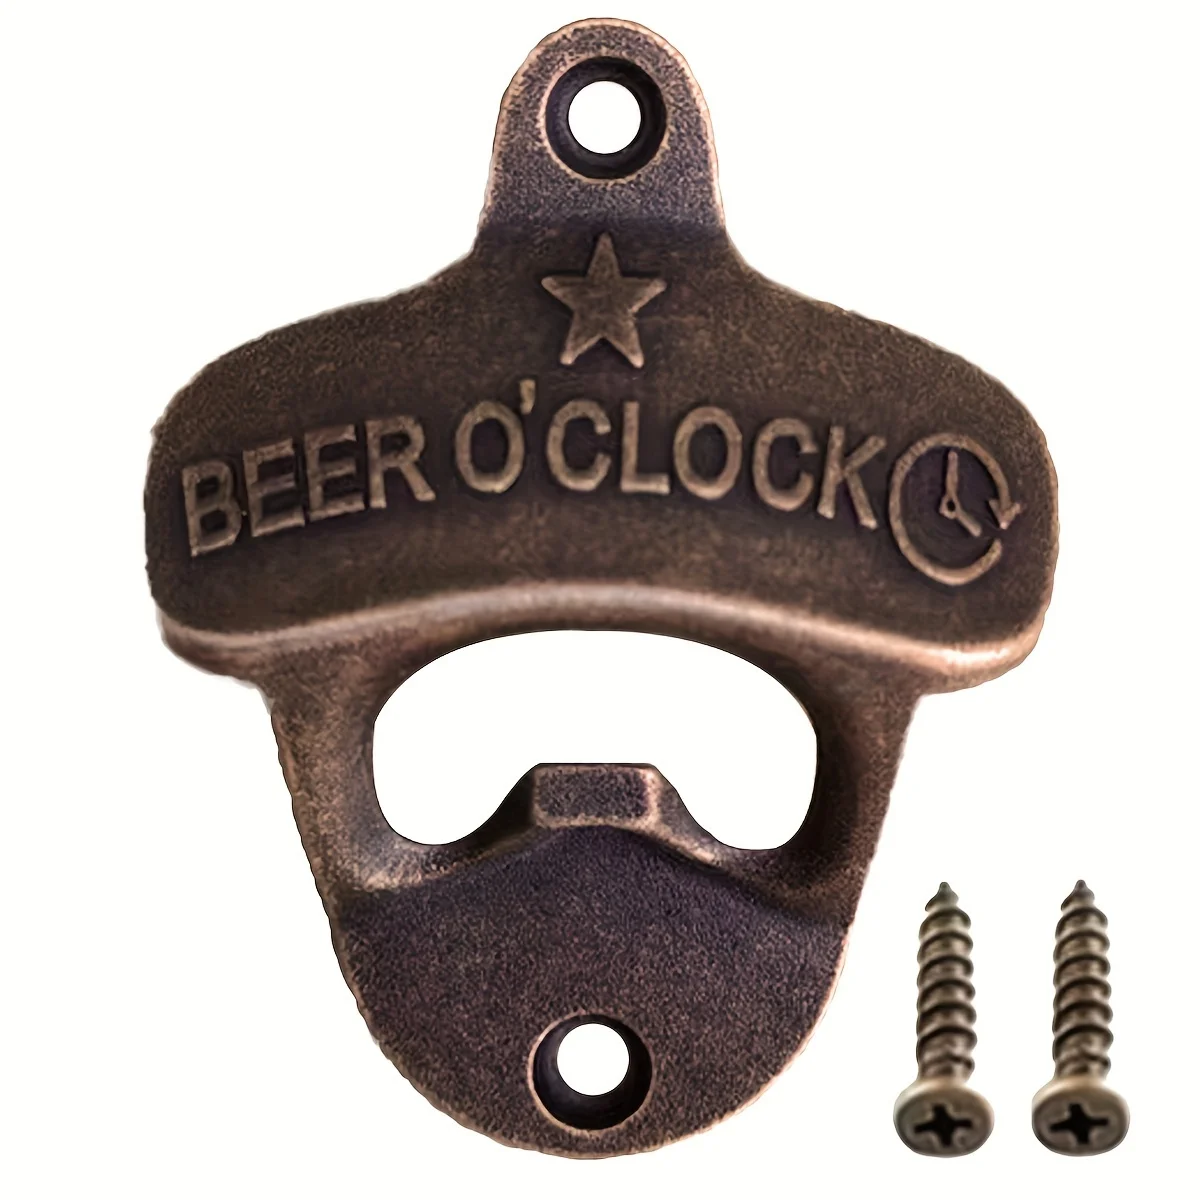 

1pc Beer O' Clock Wall Mount Bottle Opener Tools for Wall Decor Metal Beer Opener for BBQ Man Cave DIY Crafting Kitchen Gadgets